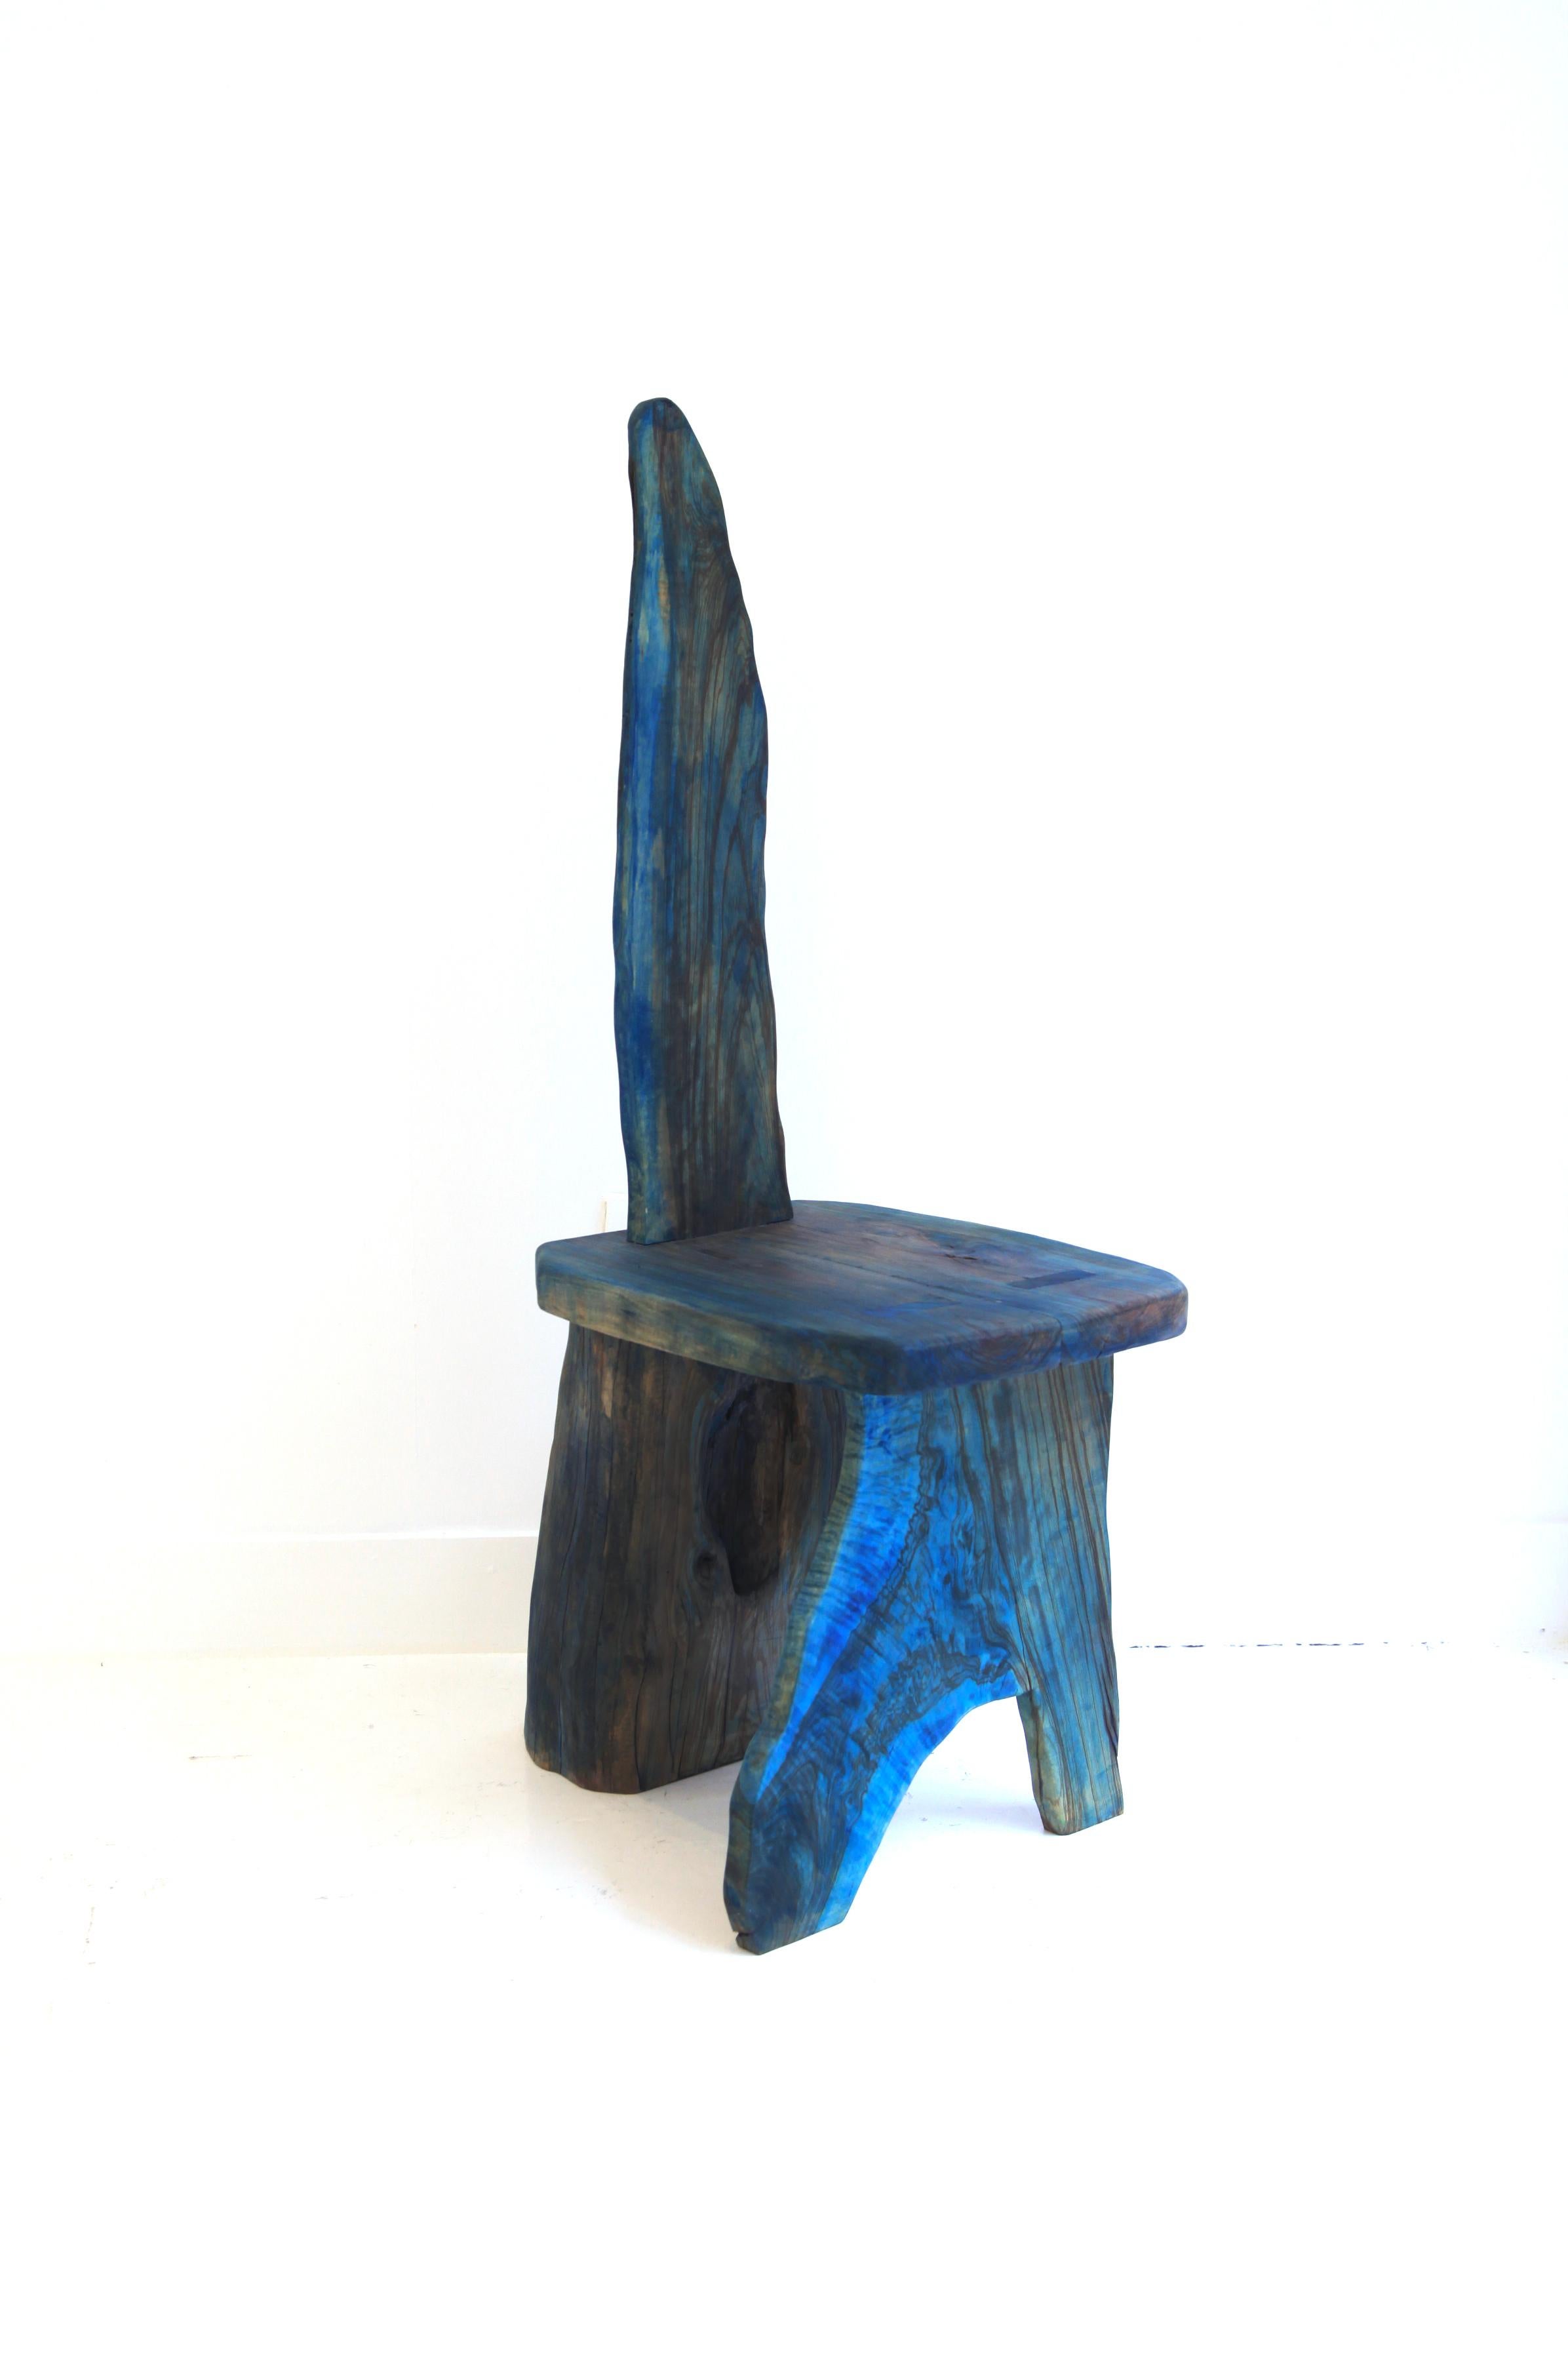 Unique olive wood chair by BehaghelFoiny
Unique 
From the series 